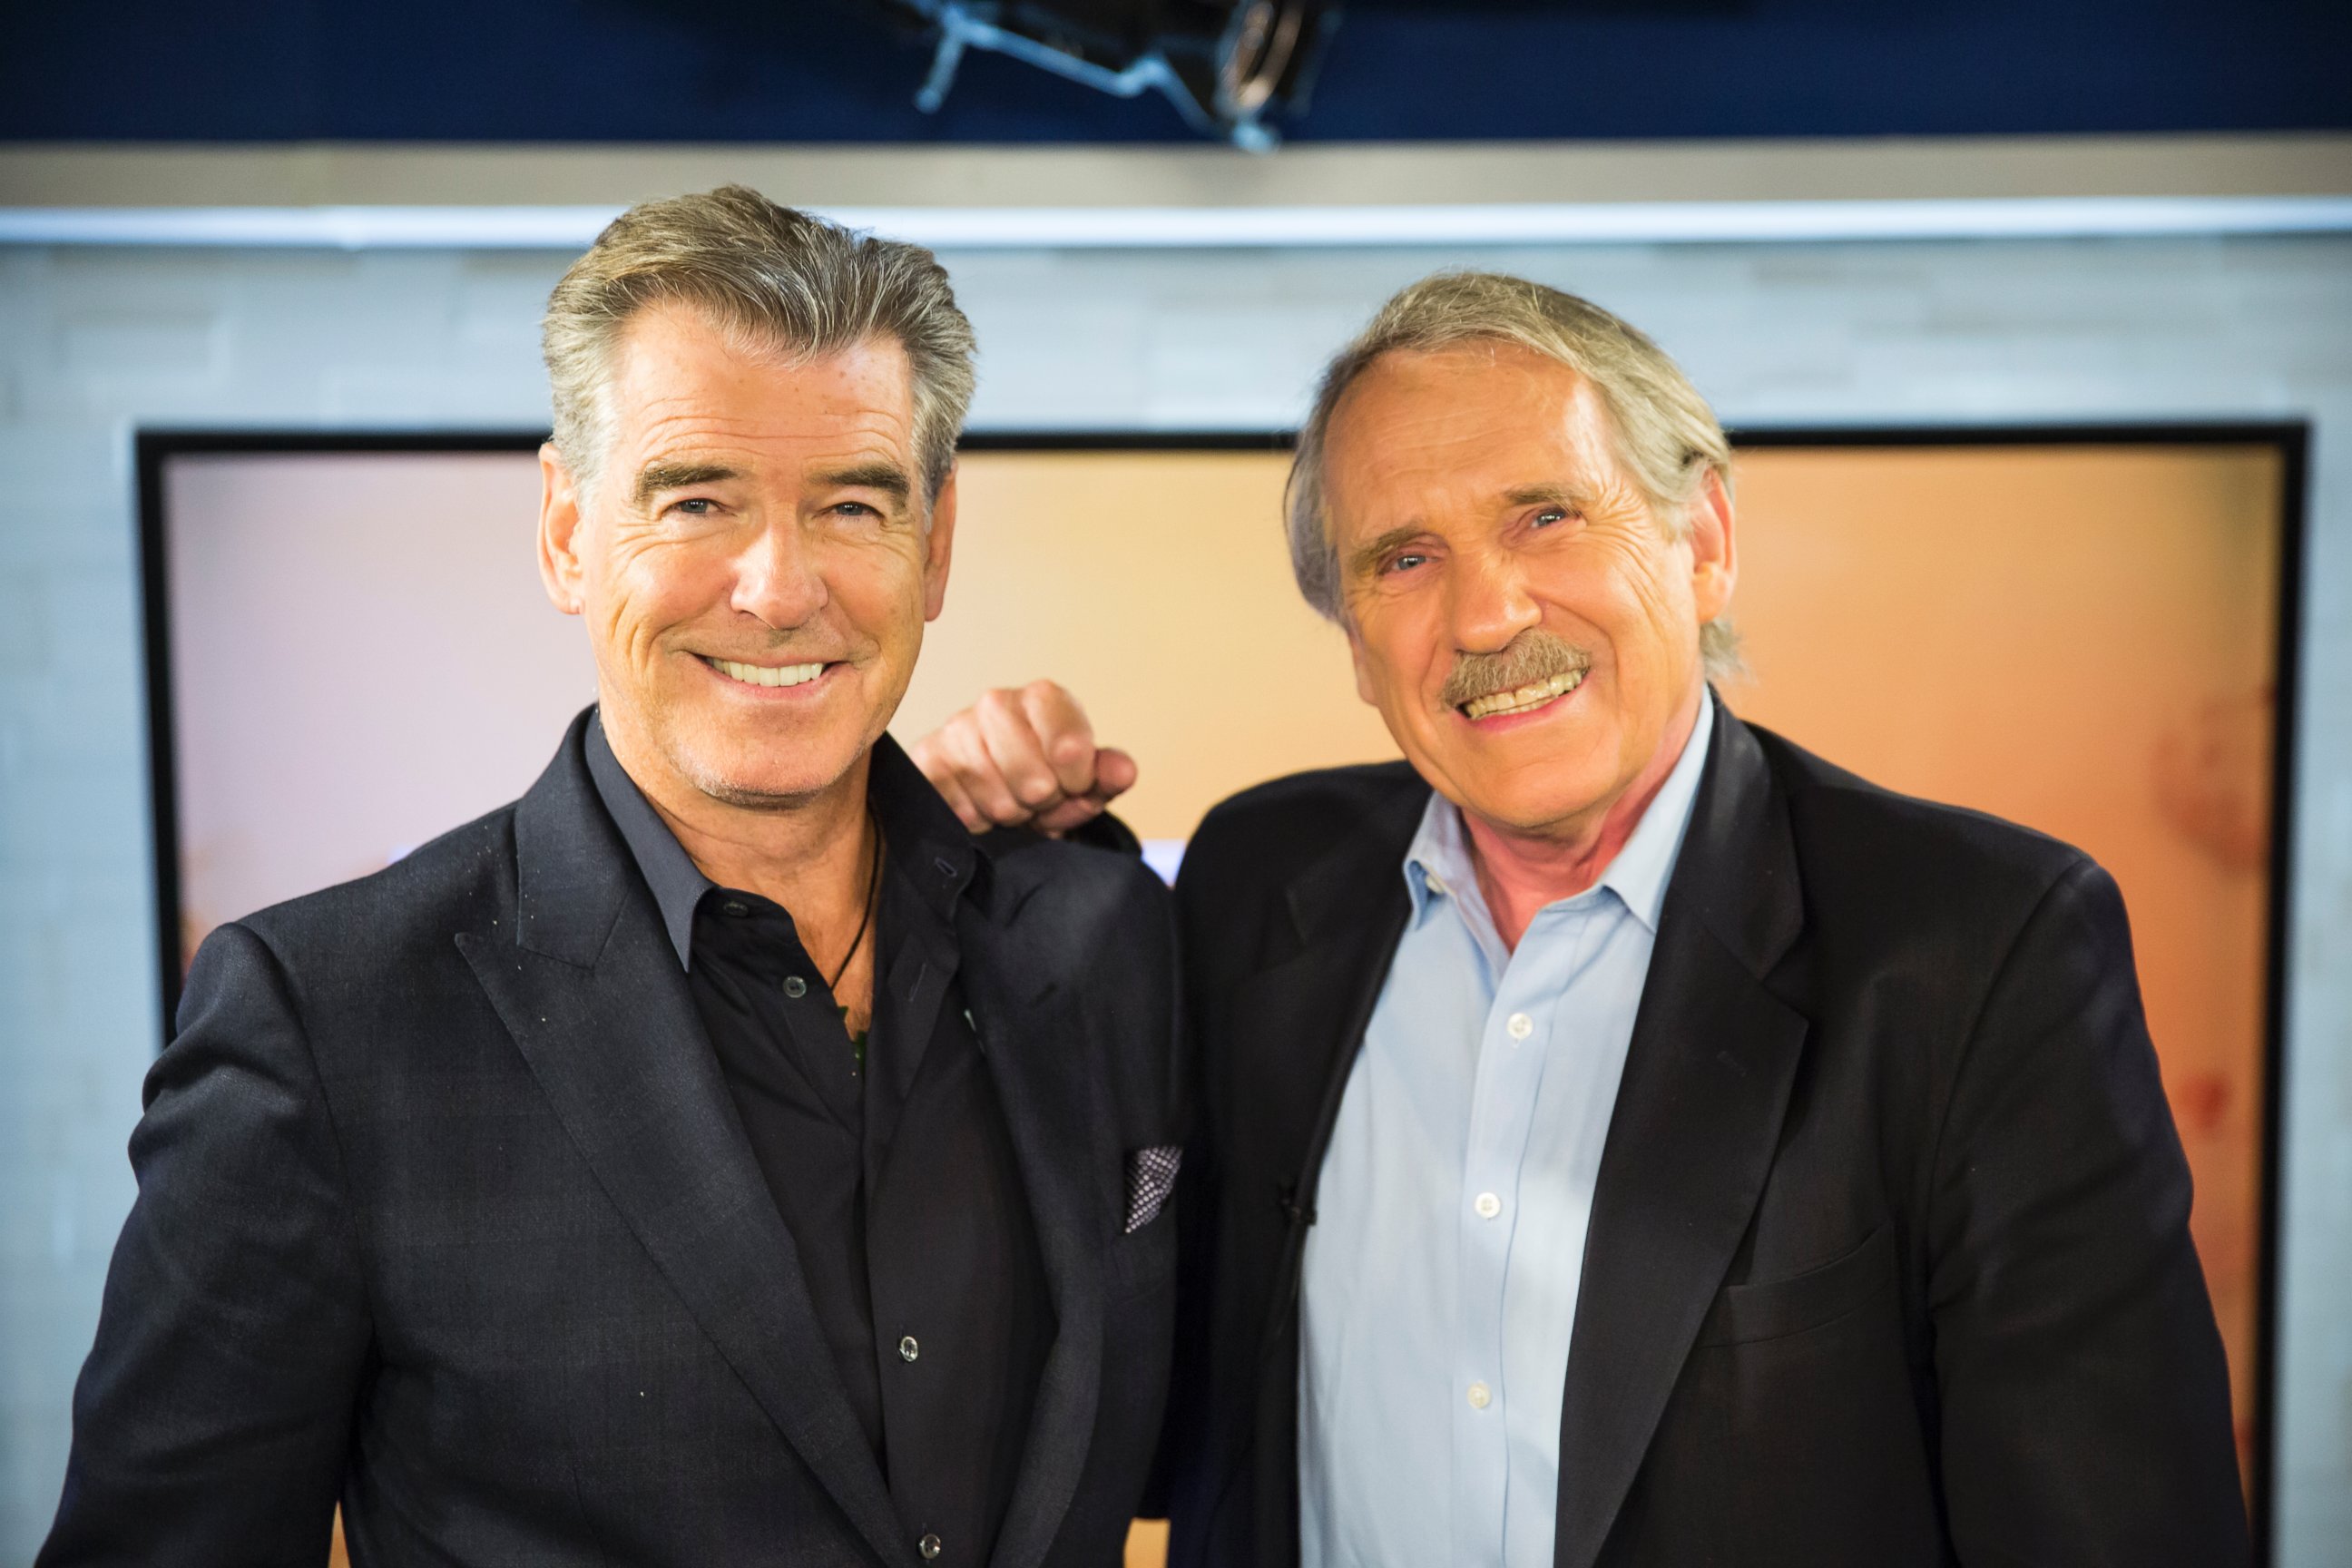 PHOTO: Pierce Brosnan and Peter Travers at the ABC Studios in New York, April 6, 2017.